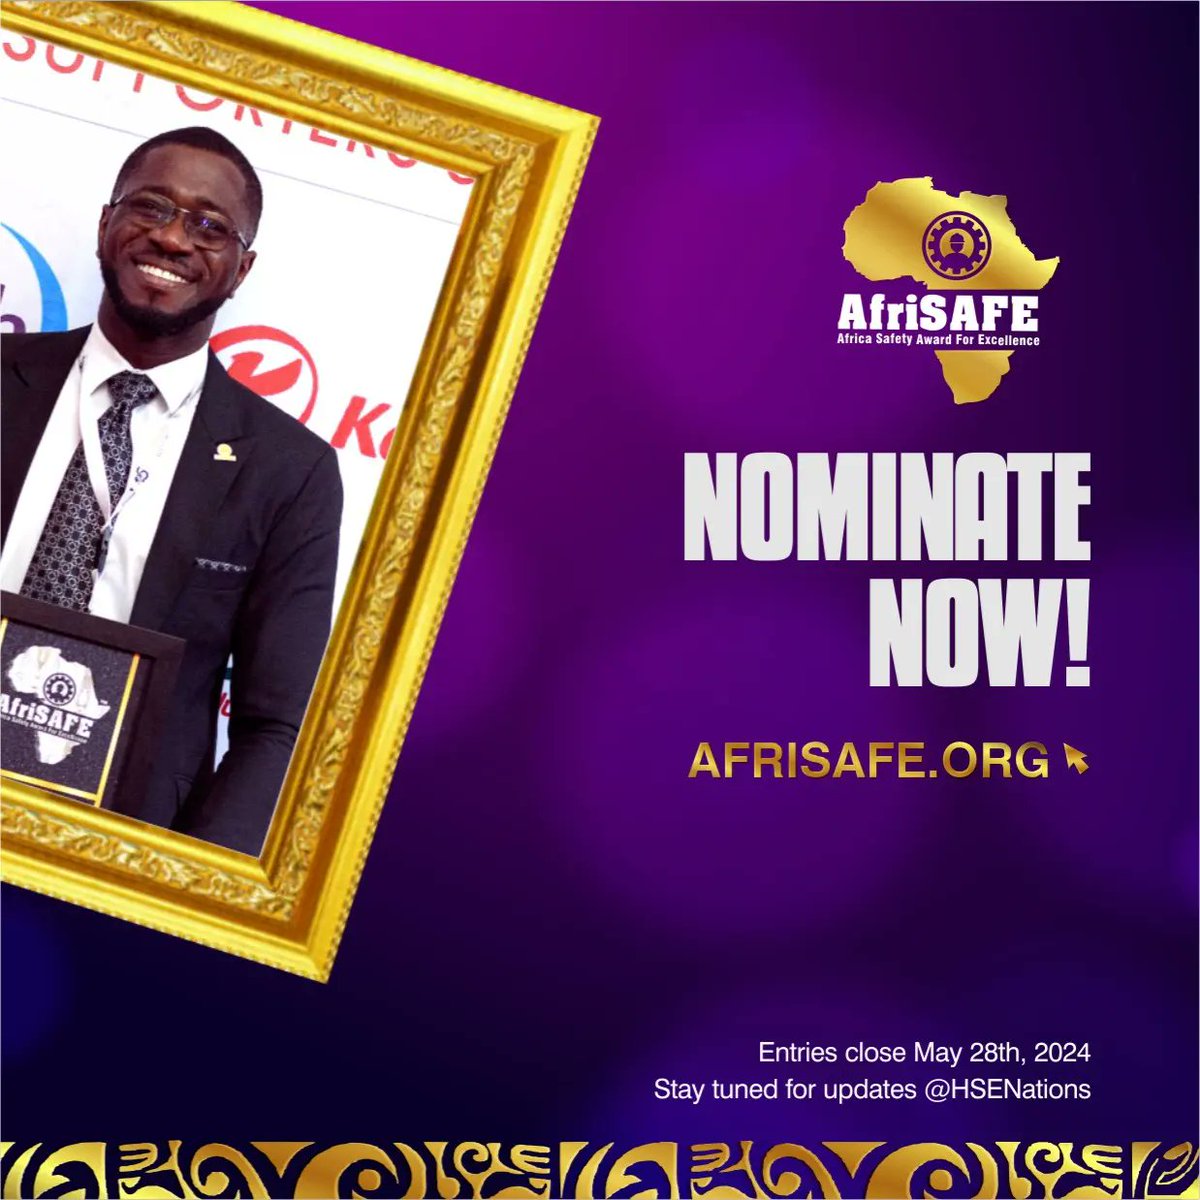 📣 Gain the recognition you deserve with the most prestigious #HSSE Award in Africa.

Hurry now to afrisafe.org today!

Nominate yourself, individuals, and organizations who have gone beyond to ensure #health, #safety, #security, and #environmental #wellbeing for all.